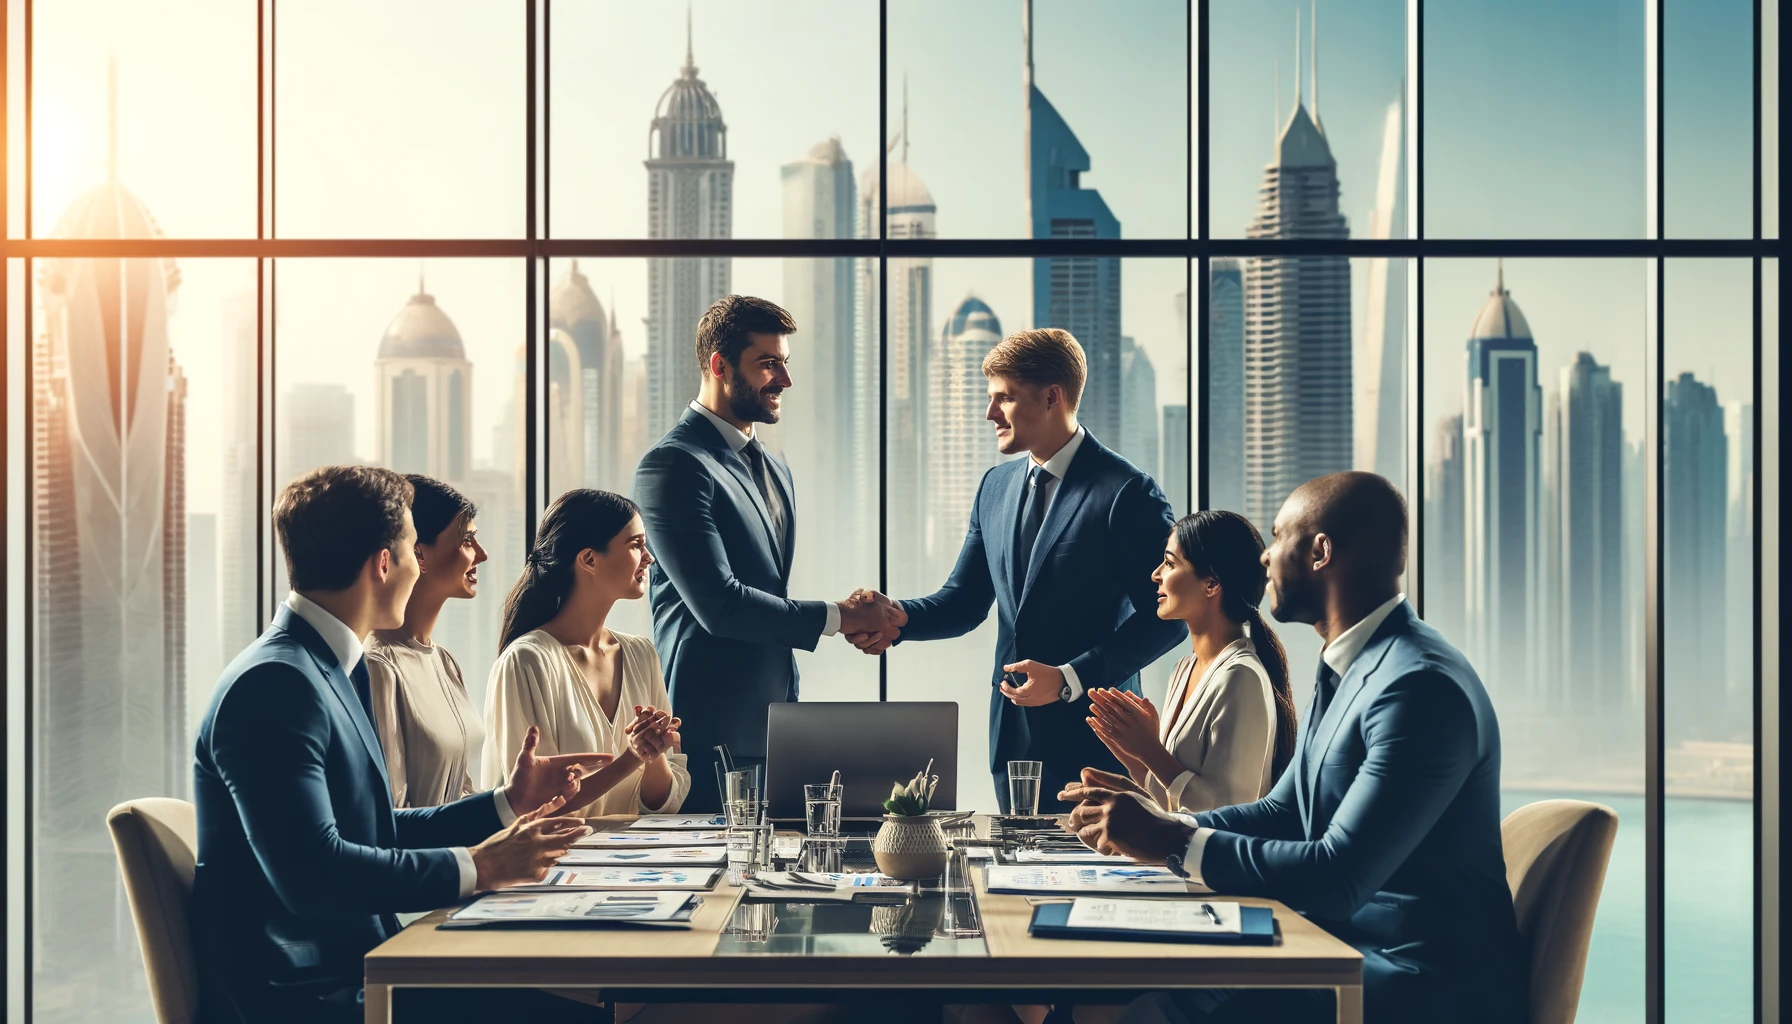 A diverse group of business professionals shaking hands and discussing around a table, with Dubai's iconic skyline in the background, symbolizing trust and excellence in debt collection services.